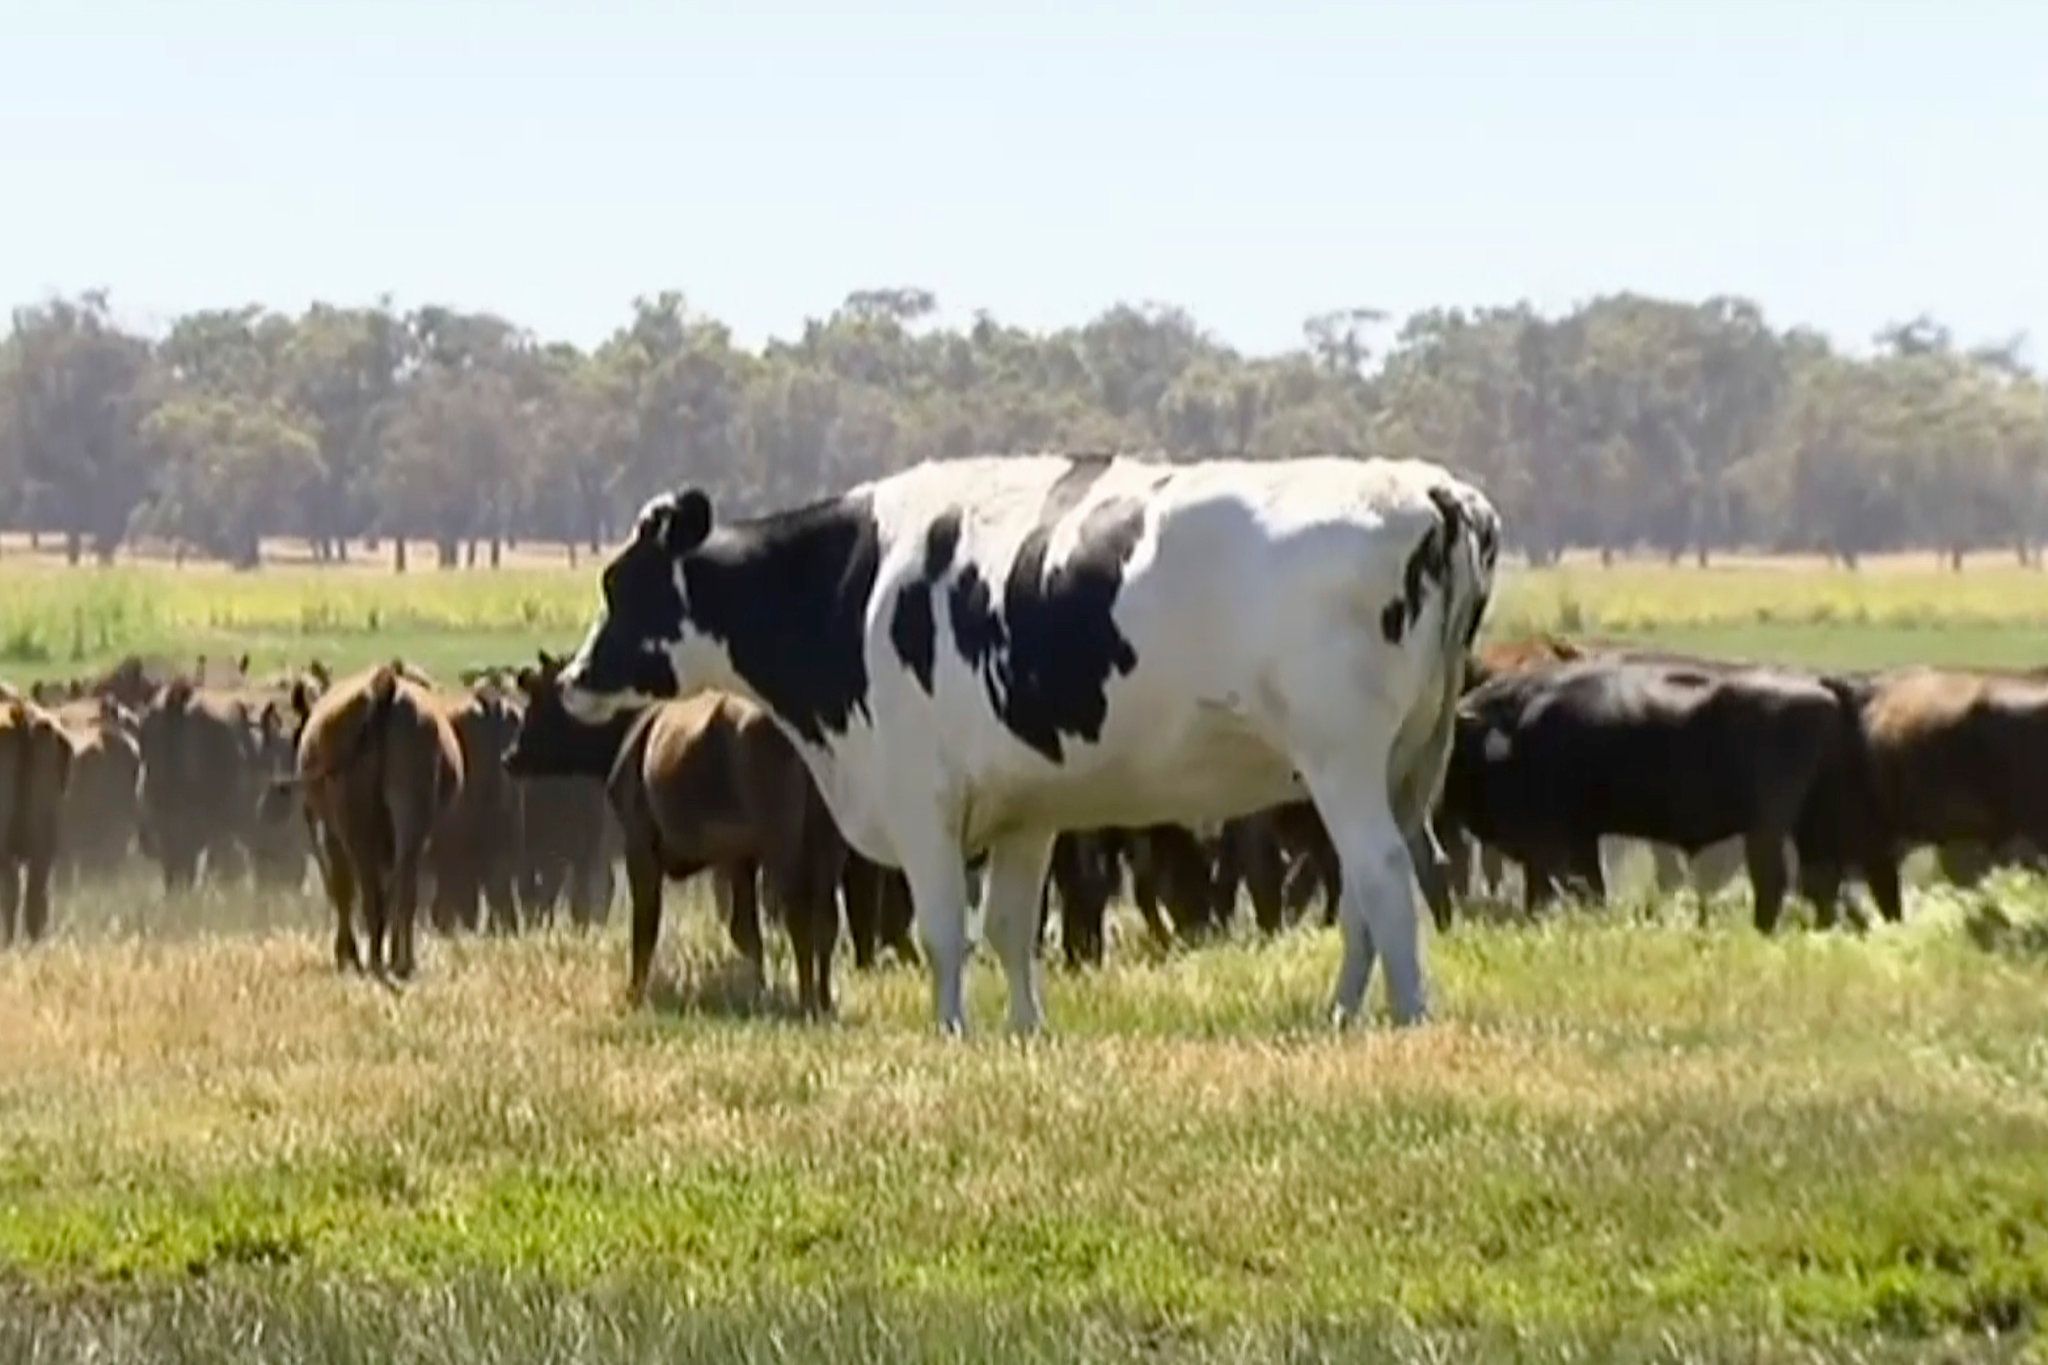 What Makes Knickers the Steer (Not Cow) So Big? Cattle's